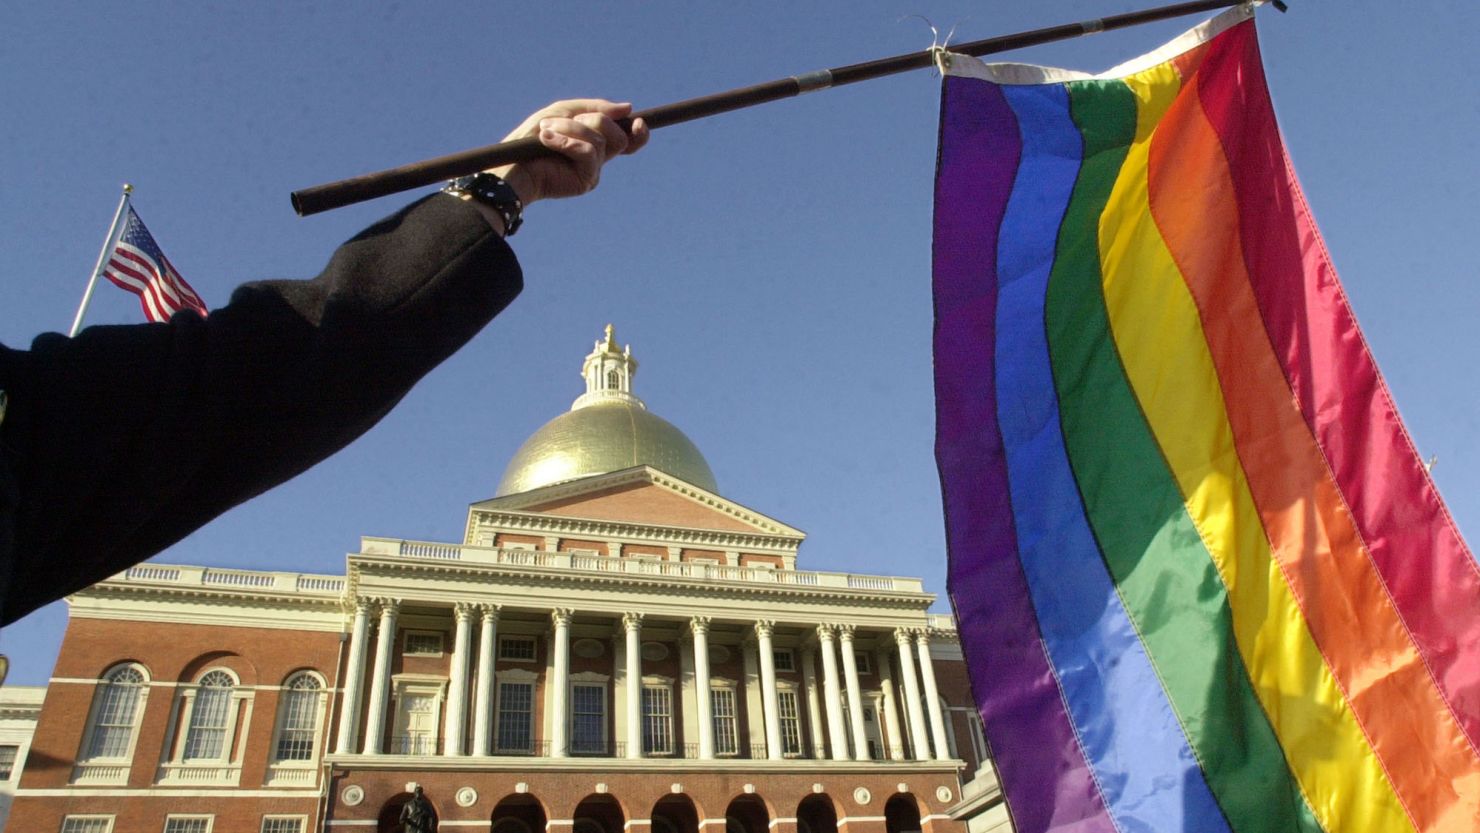 A supporter of gay marriage waves a rainbow flag outside the Massachusetts State House, where the Legislature was in its second day of debate over a possible constitutional amendment banning same-sex marriage on February 12, 2004, in Boston.